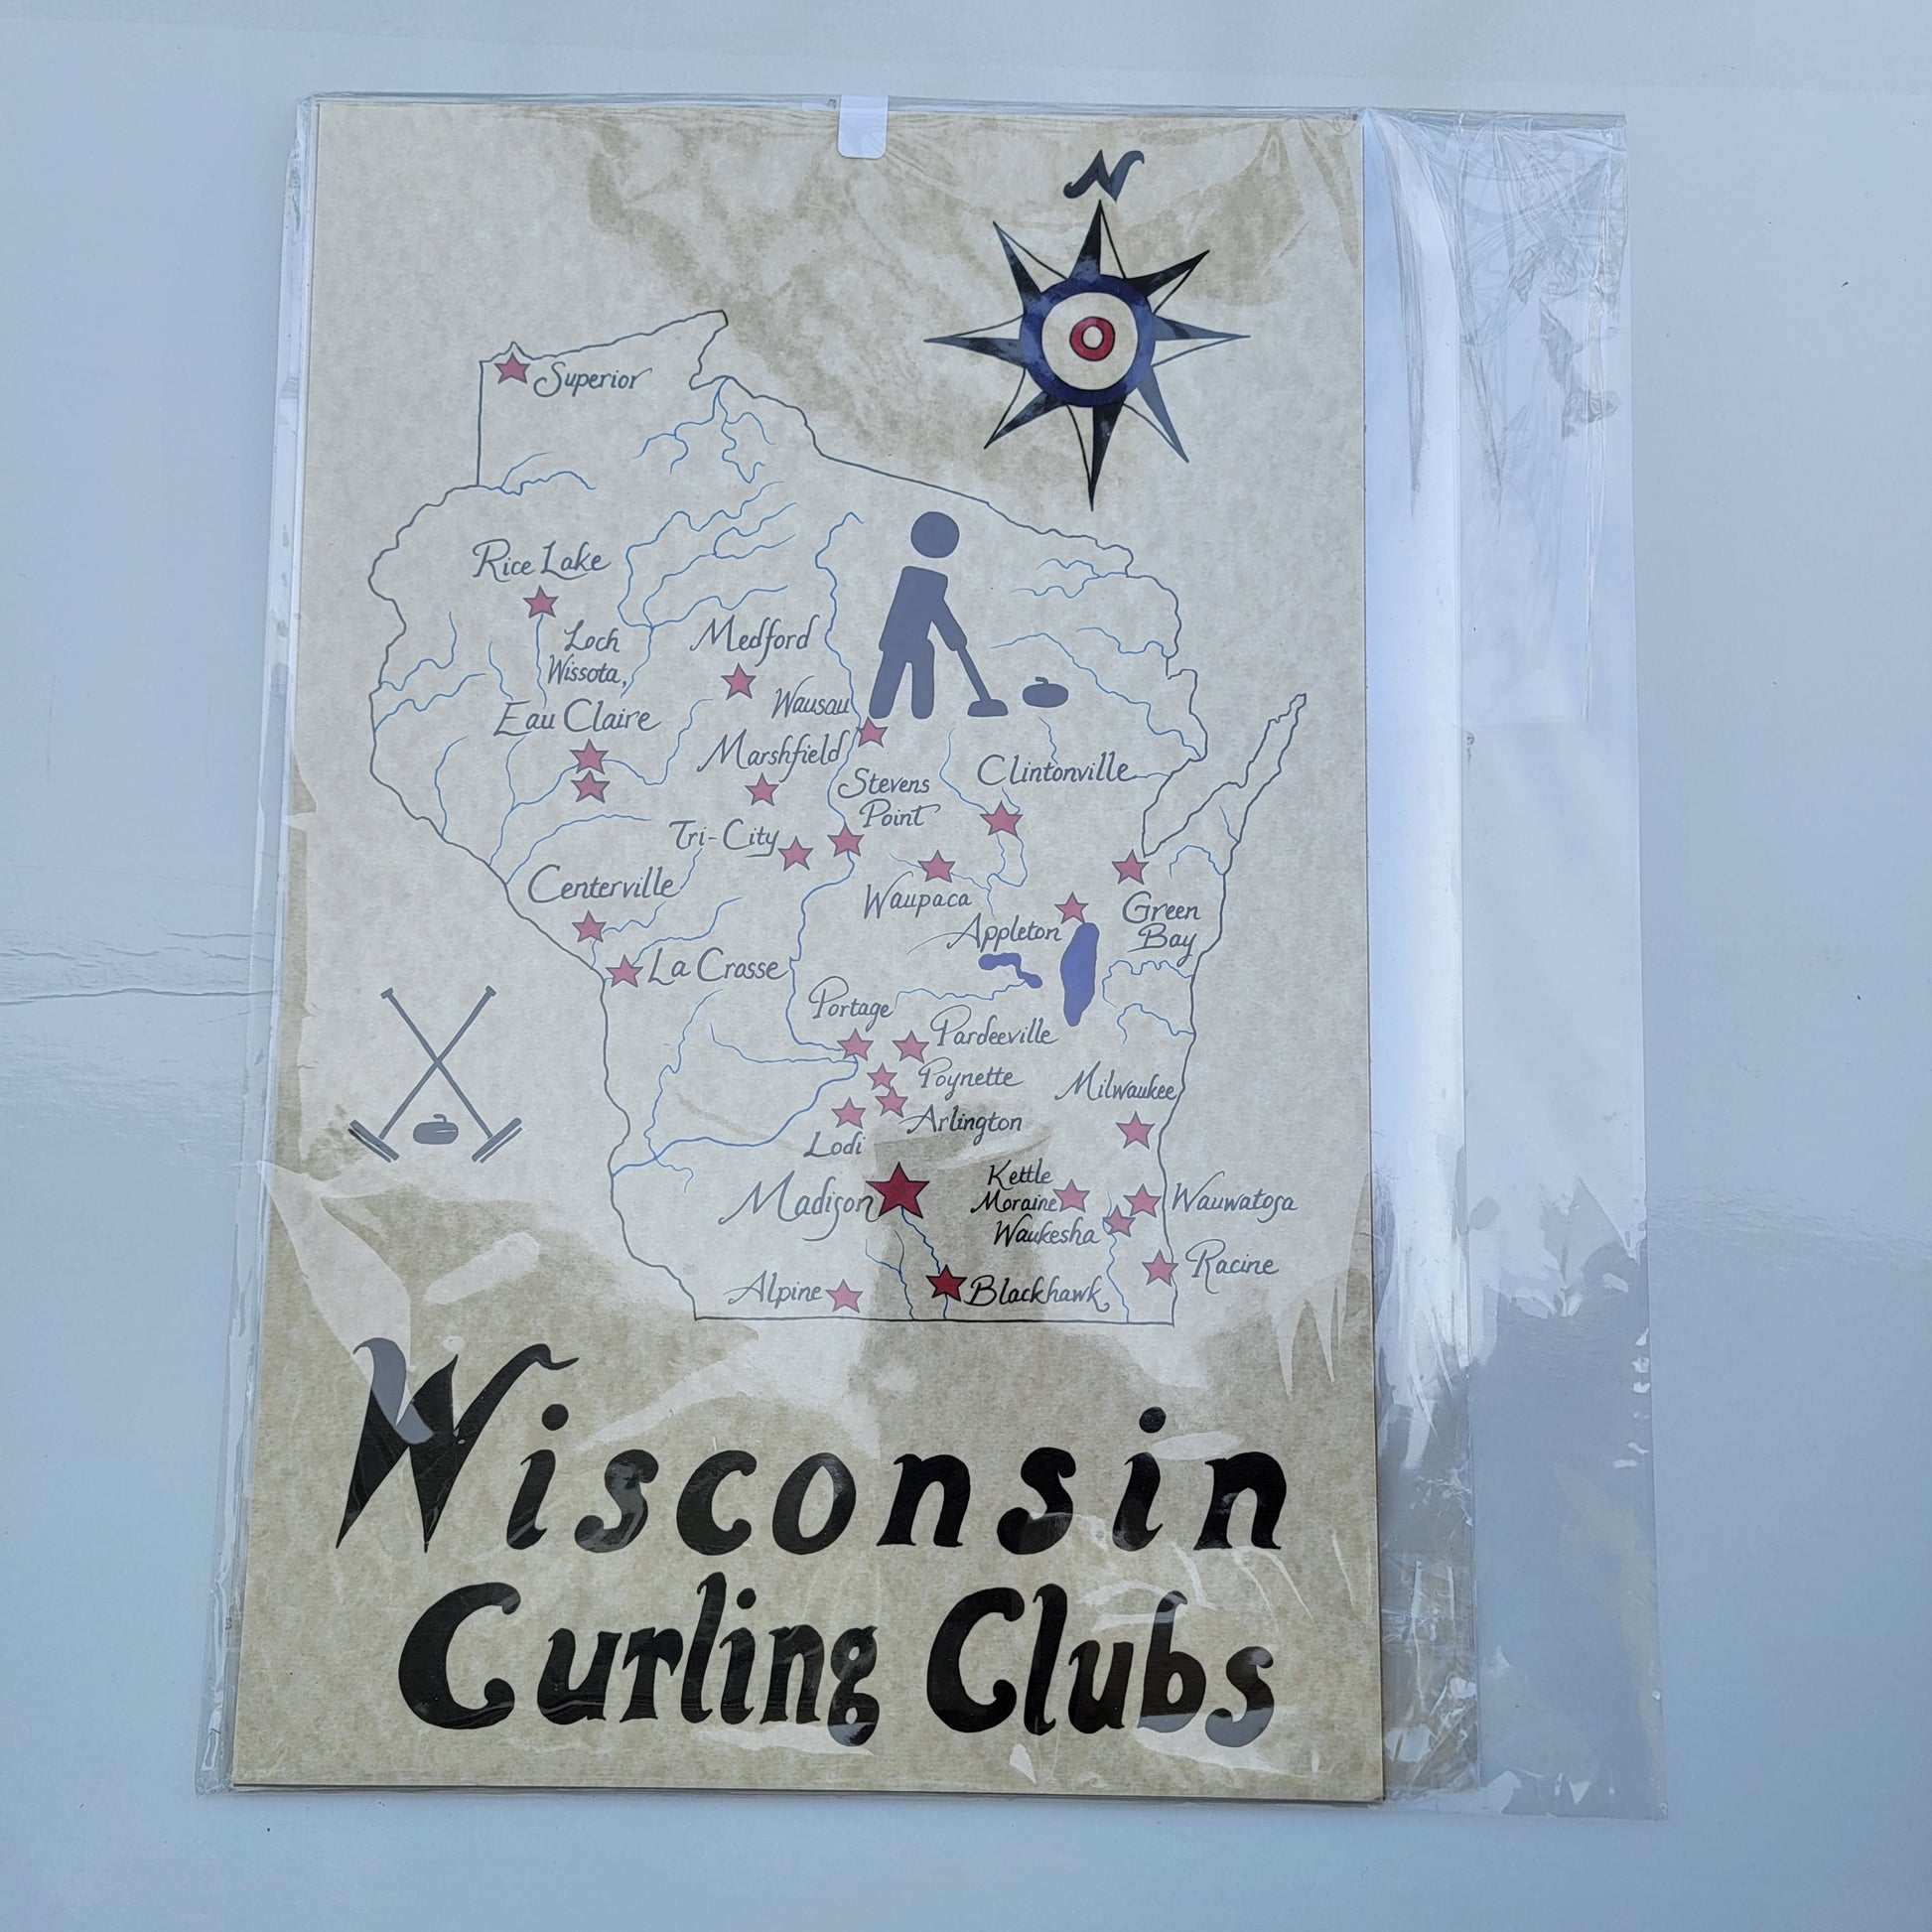 Wisconsin curling clubs